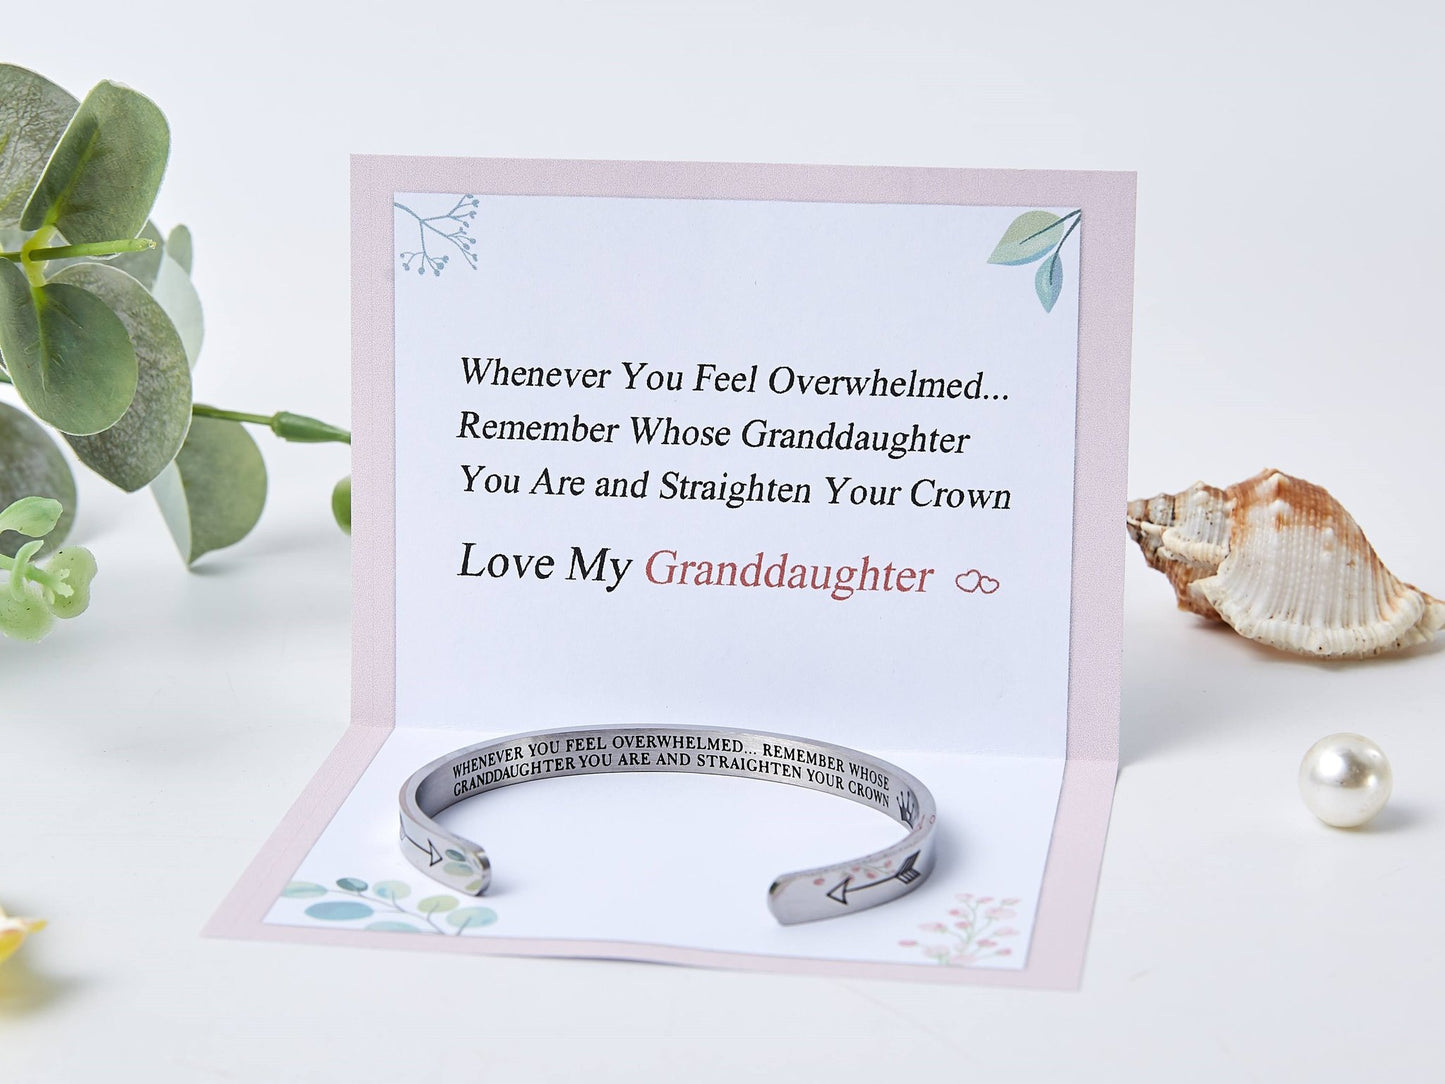 To My Granddaughter "WHENEVER YOU FEEL OVERWHELMED... REMEMBER WHOSE GRANDDAUGHTER YOU ARE AND STRAIGHTEN YOUR CROWN" Bracelet - SARAH'S WHISPER